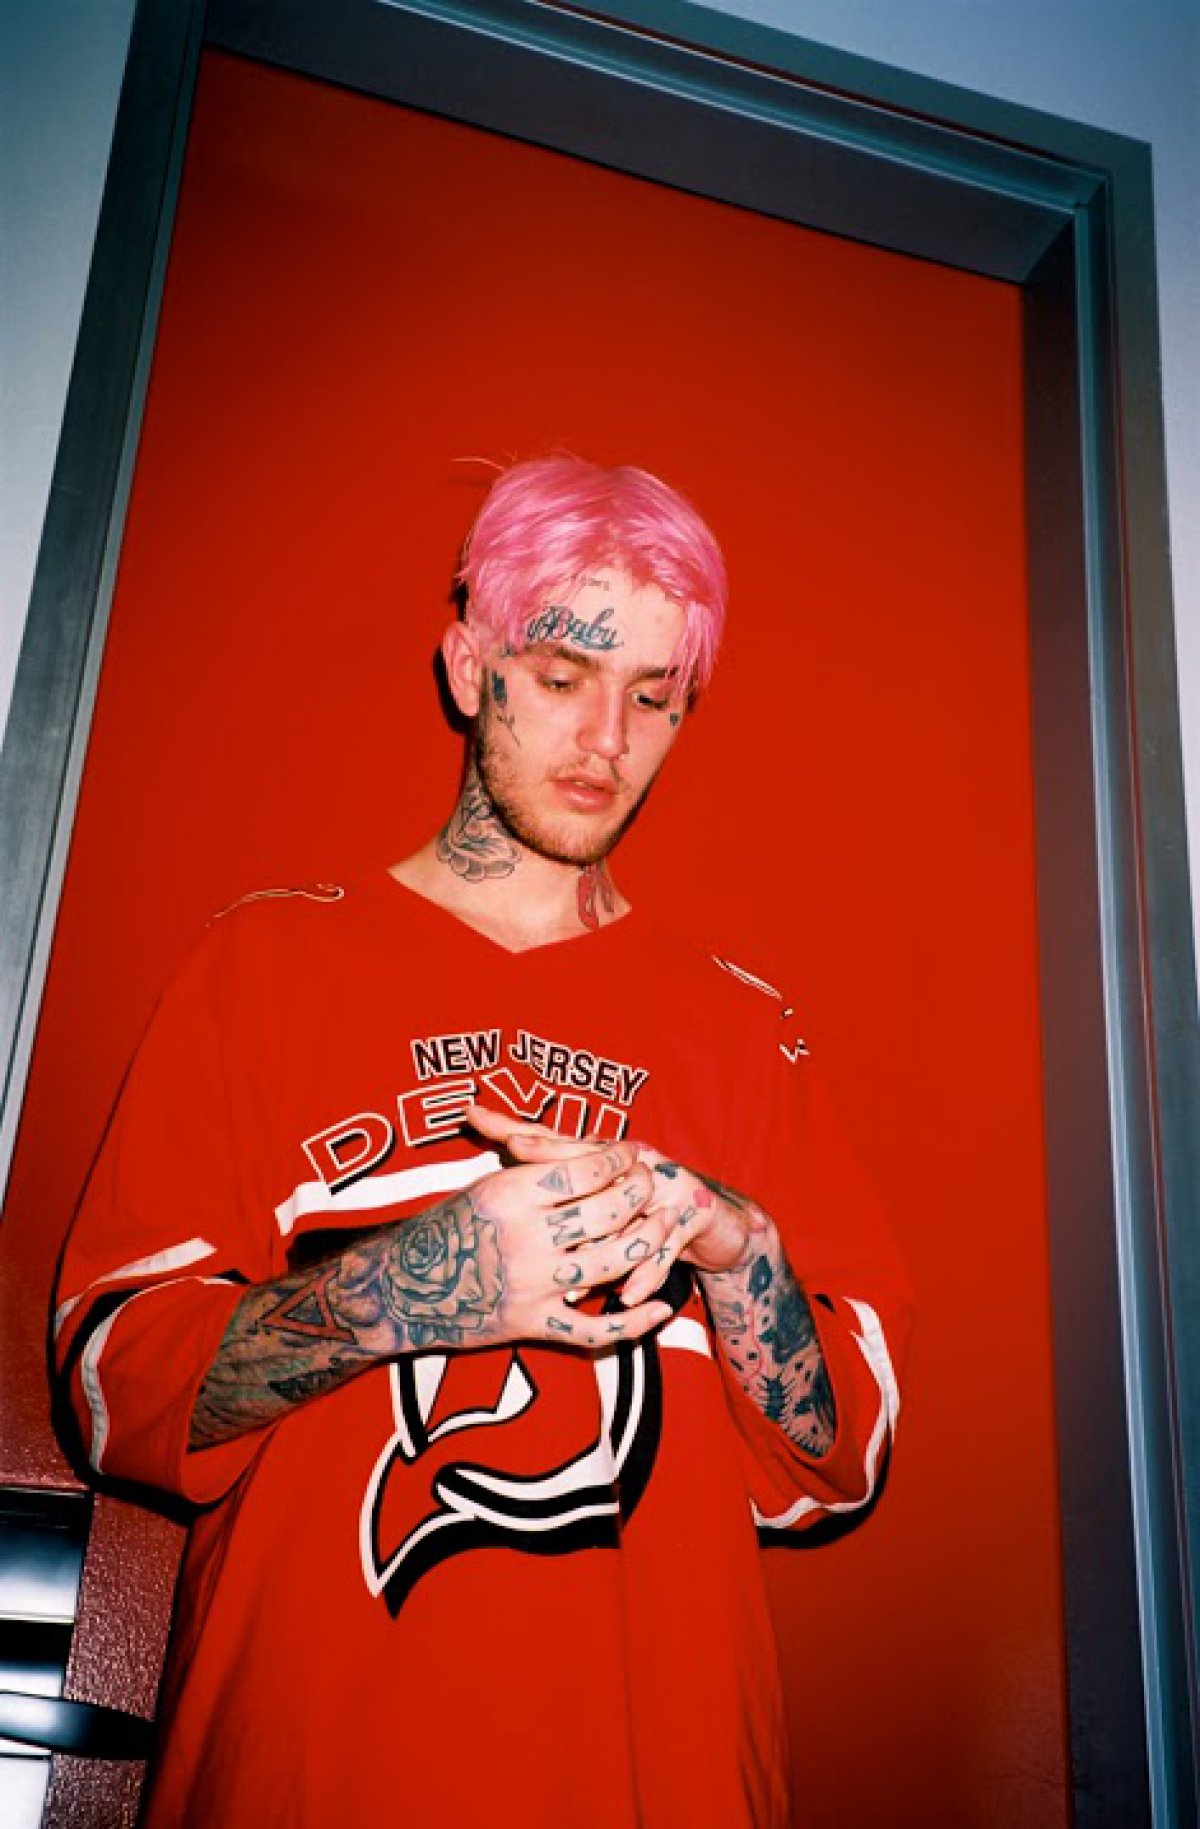 Lil Peep, rapper and singer, dead at 21 - Reality TV World